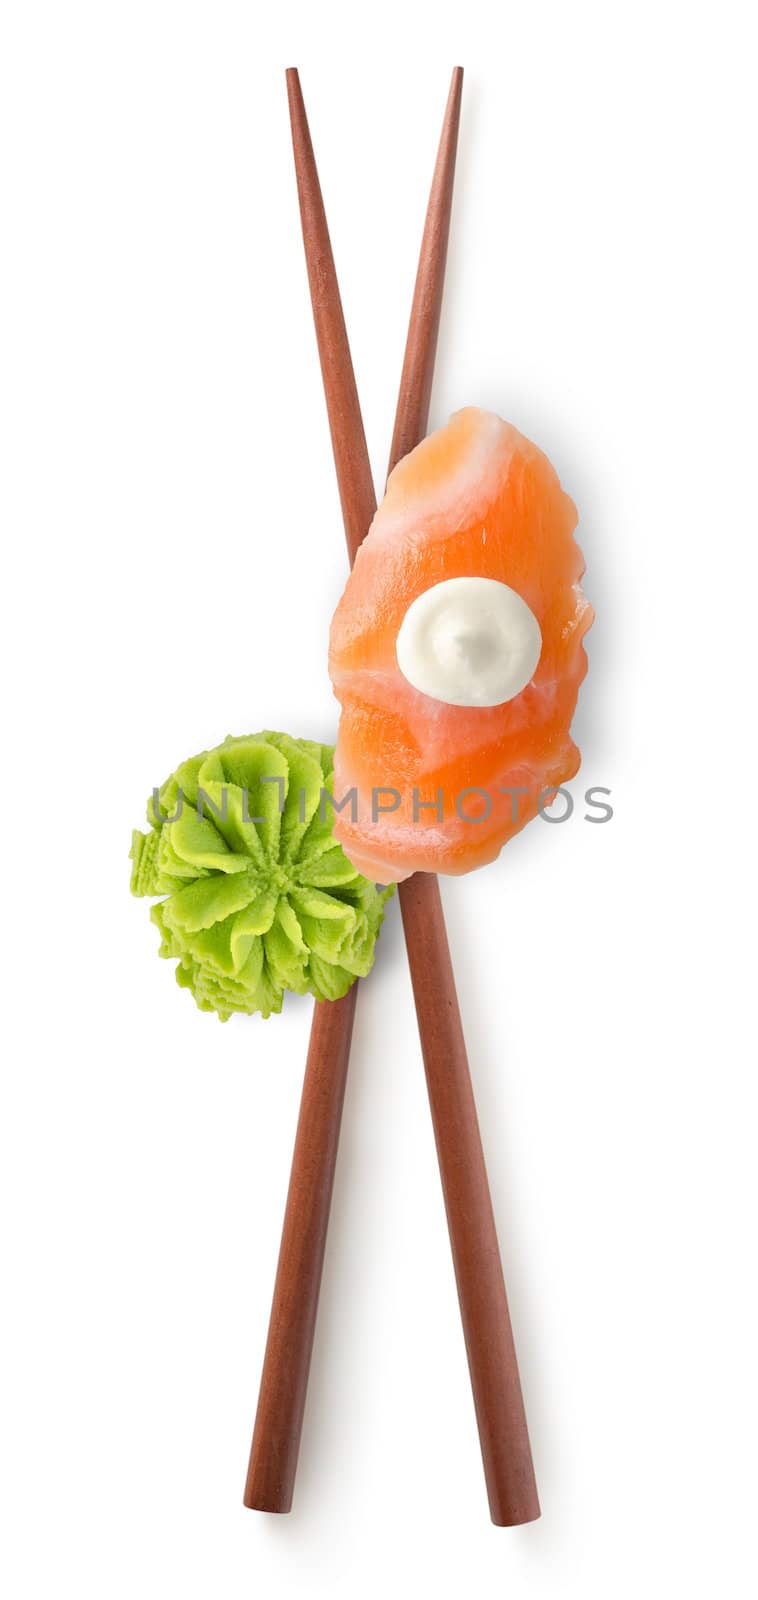 Wooden chinese sticks isolated on a white background